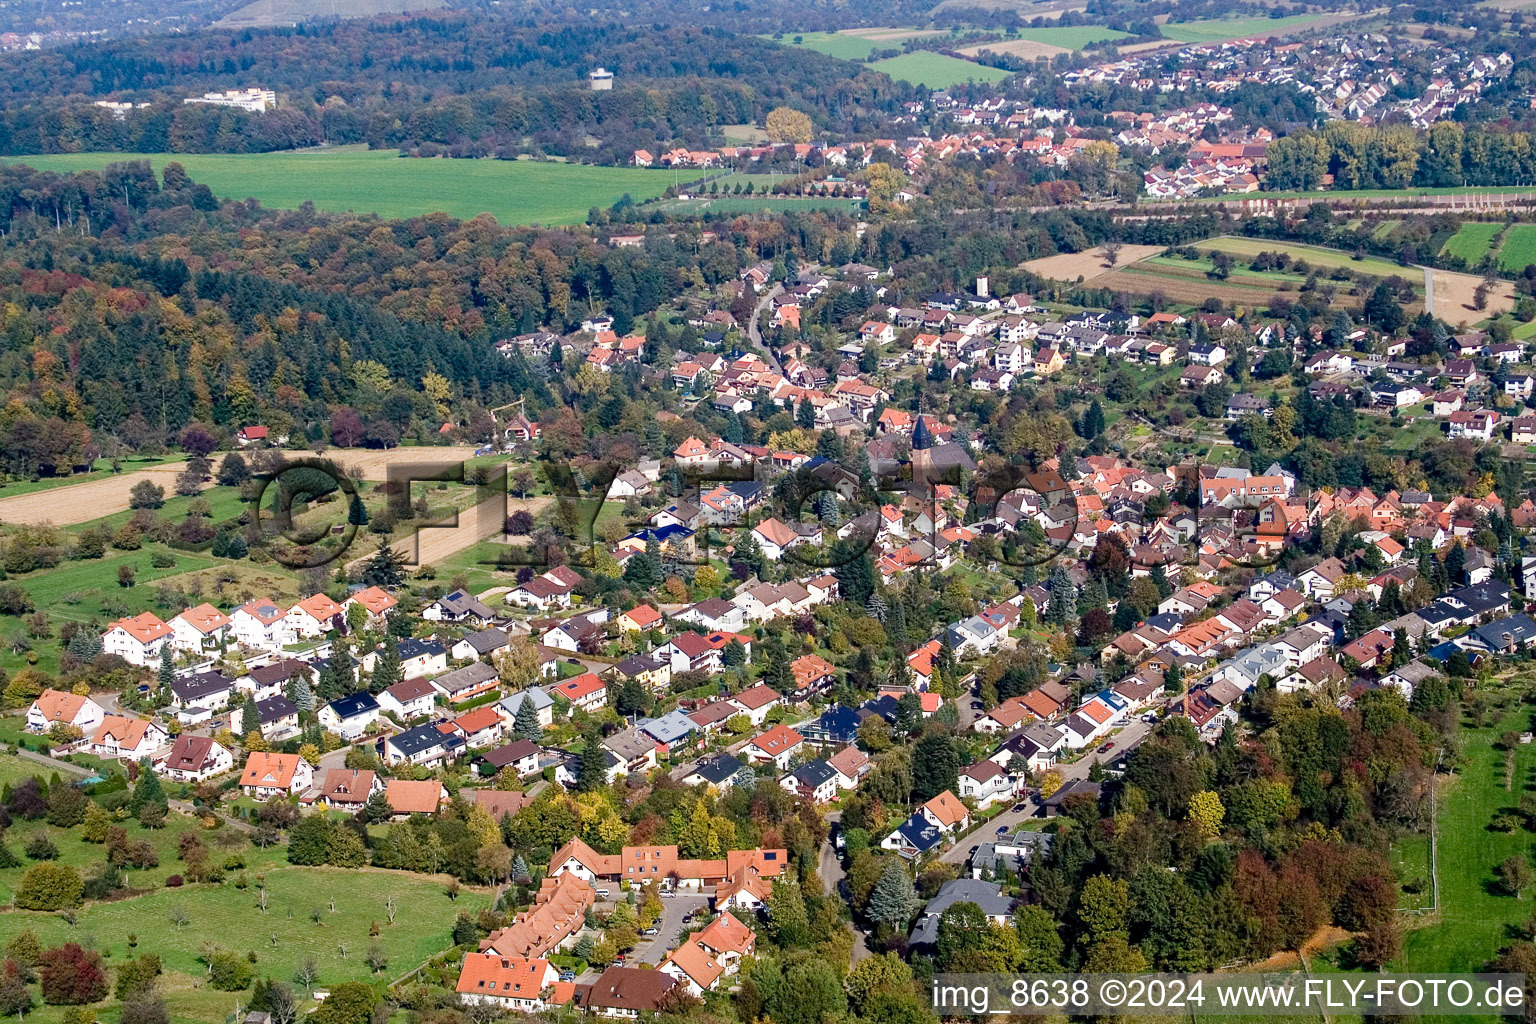 Aerial view of Village view in the district Gruenwettersbach in Karlsruhe in the state Baden-Wurttemberg